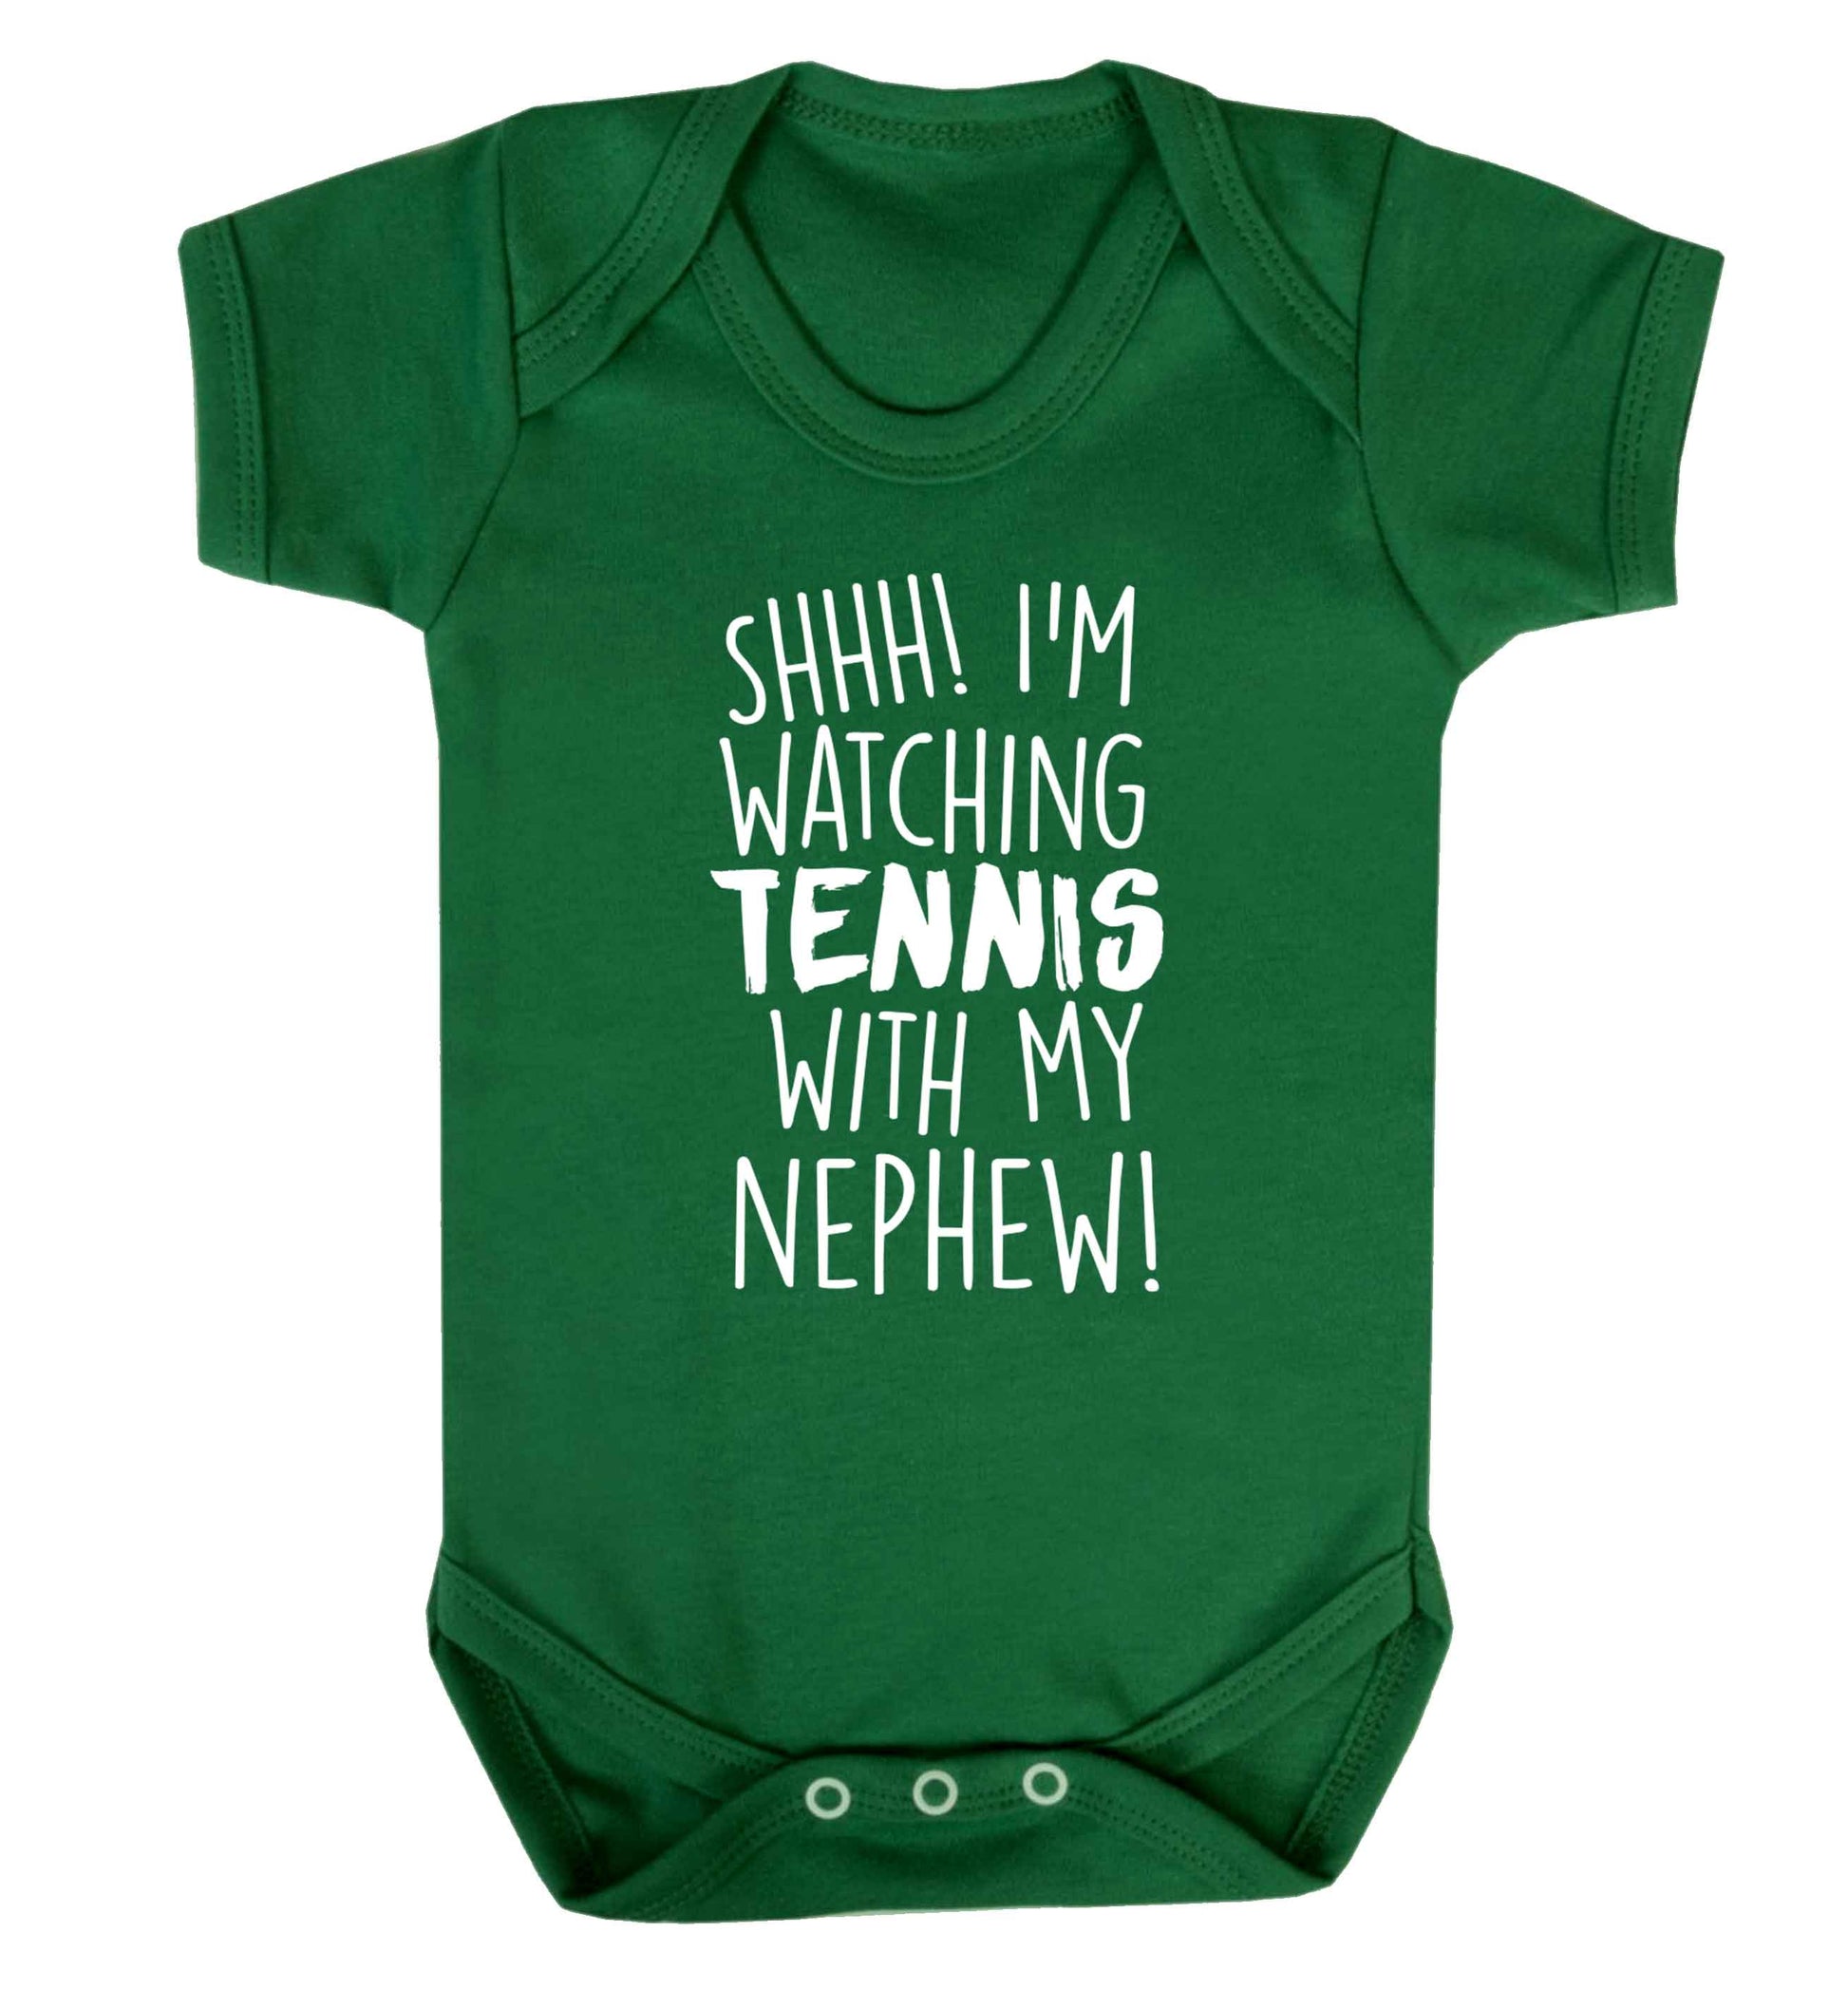 Shh! I'm watching tennis with my nephew! Baby Vest green 18-24 months